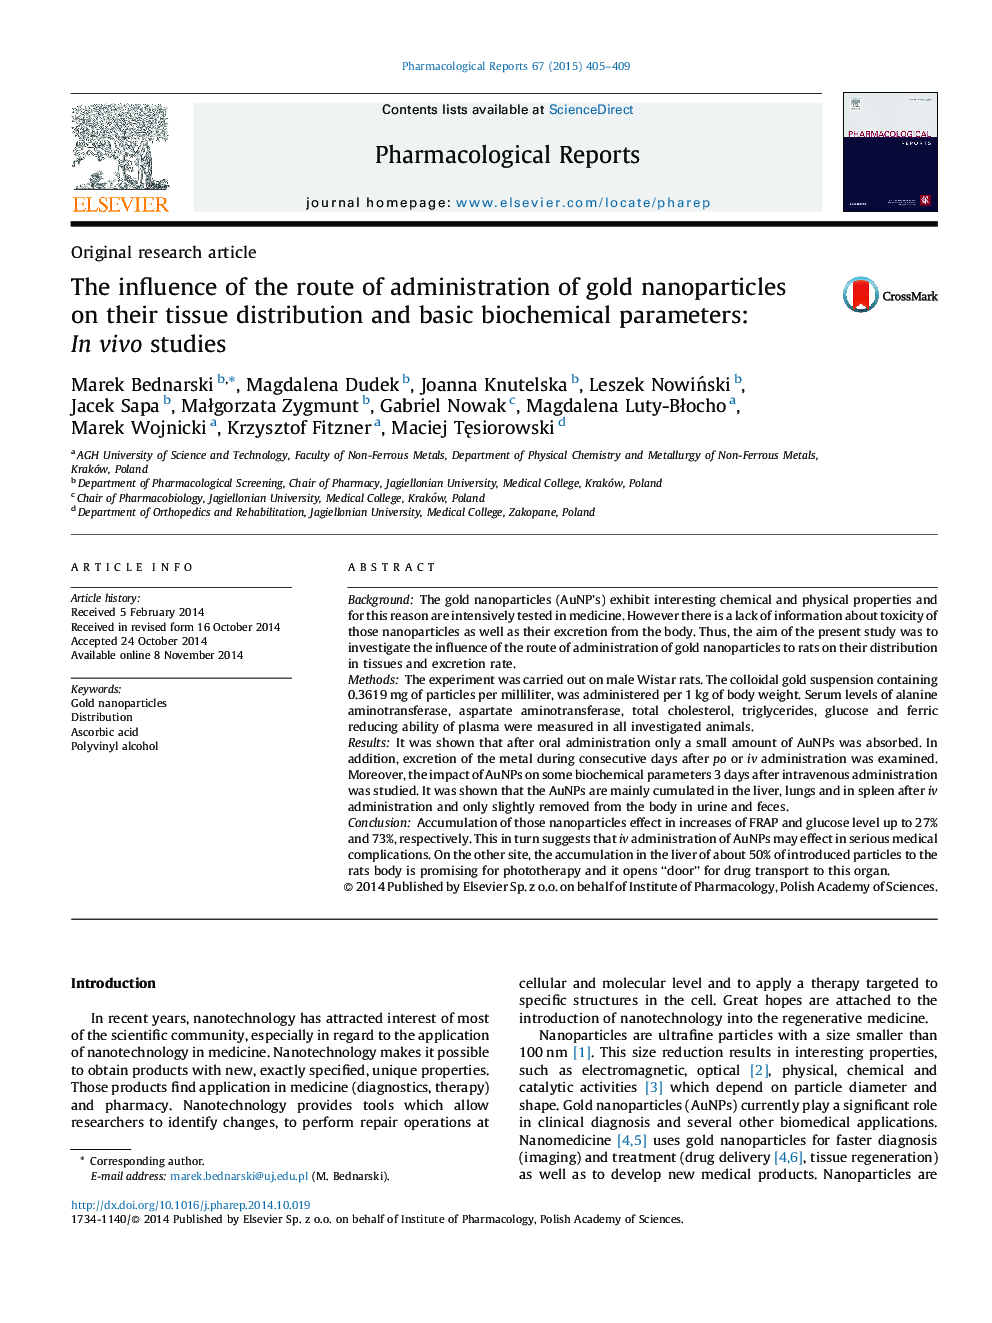 The influence of the route of administration of gold nanoparticles on their tissue distribution and basic biochemical parameters: In vivo studies